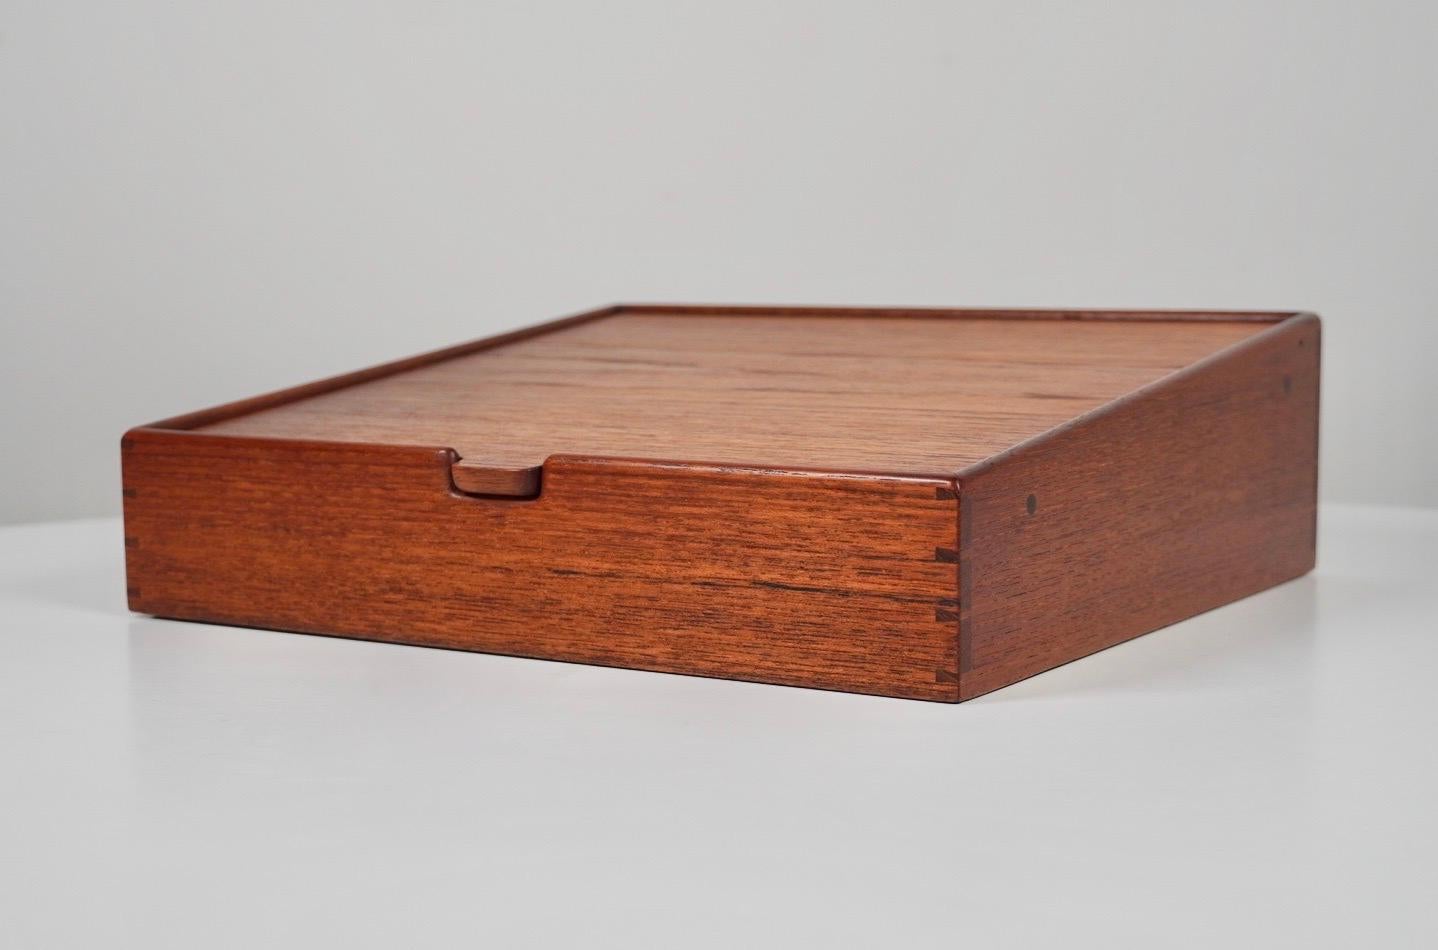 Sculptural teak jewelry box with mirror, designed by Ejnar Larsen and Aksel Bender Madsen, created by Willy Beck of Denmark. Wedge form with fine joinery all around, removable dividers for the placement of the desired objects. Retains original